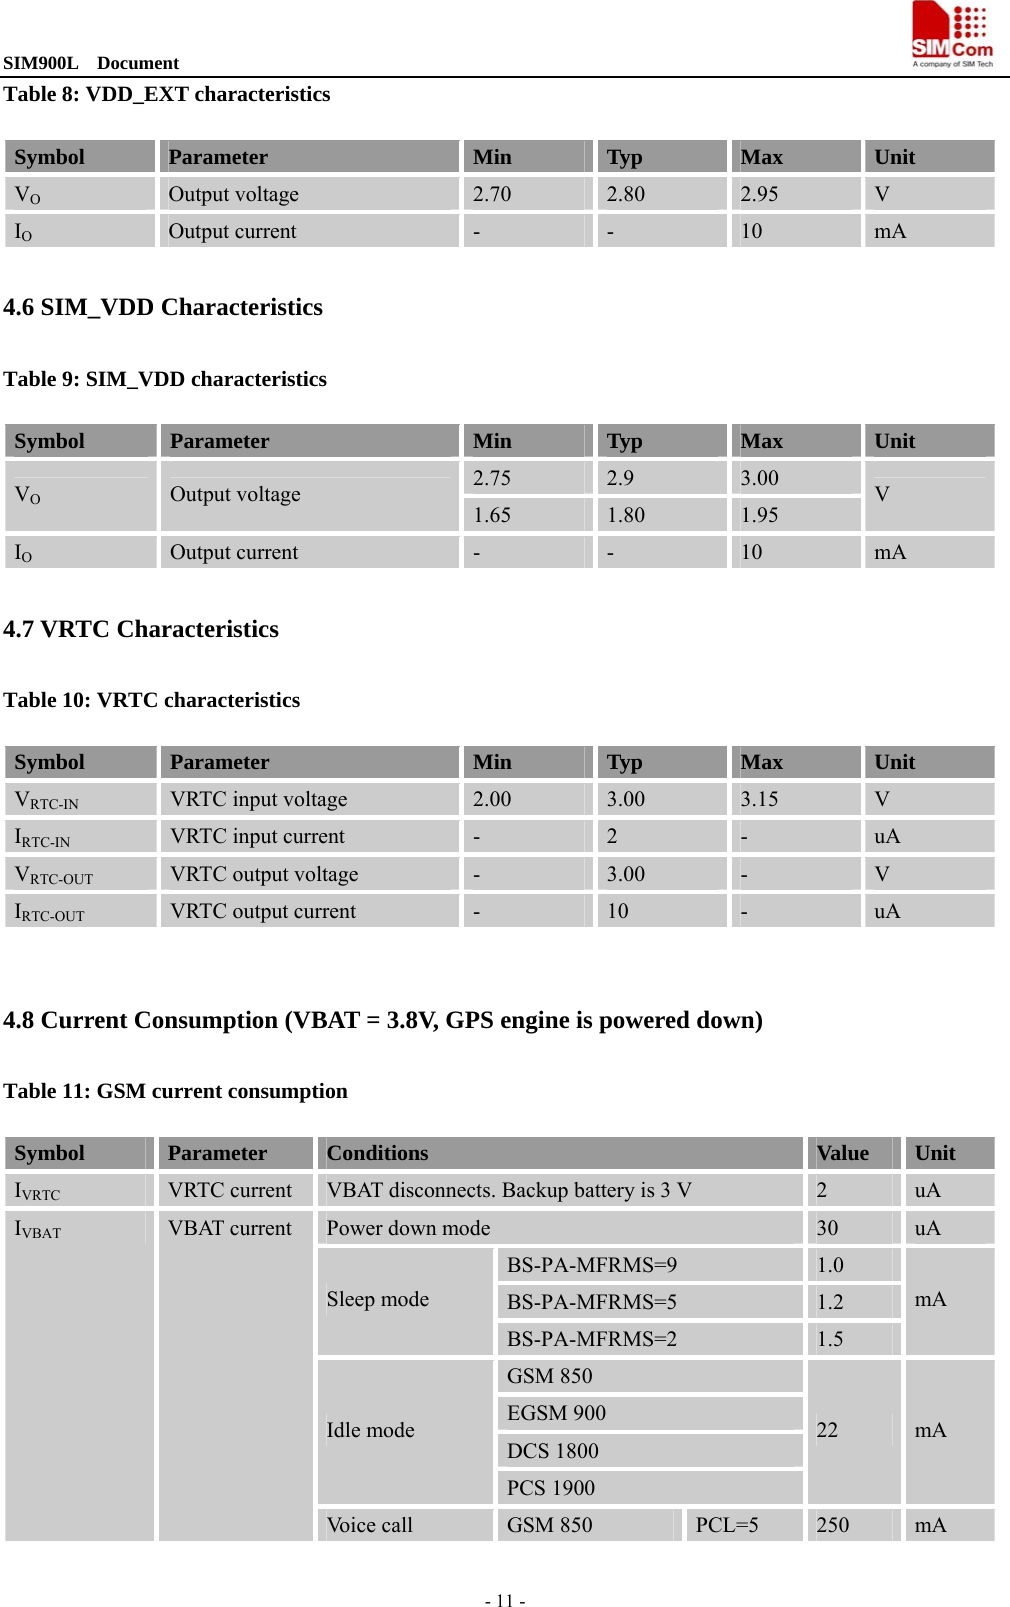 SIM900L  Document                                                                                - 11 - Table 8: VDD_EXT characteristics Symbol  Parameter  Min  Typ  Max  Unit VO Output voltage  2.70  2.80  2.95  V IO Output current  -  -  10  mA 4.6 SIM_VDD Characteristics Table 9: SIM_VDD characteristics Symbol  Parameter  Min  Typ  Max  Unit 2.75  2.9  3.00 VO Output voltage 1.65  1.80  1.95 V IO Output current  -  -  10  mA 4.7 VRTC Characteristics Table 10: VRTC characteristics Symbol  Parameter  Min  Typ  Max  Unit VRTC-IN VRTC input voltage  2.00  3.00  3.15  V IRTC-IN VRTC input current  -  2  -  uA VRTC-OUT VRTC output voltage  -  3.00  -  V IRTC-OUT VRTC output current  -  10  -  uA  4.8 Current Consumption (VBAT = 3.8V, GPS engine is powered down) Table 11: GSM current consumption Symbol  Parameter  Conditions  Value  Unit IVRTC VRTC current  VBAT disconnects. Backup battery is 3 V  2  uA Power down mode  30  uA BS-PA-MFRMS=9  1.0 BS-PA-MFRMS=5  1.2 Sleep mode BS-PA-MFRMS=2  1.5 mA GSM 850 EGSM 900 DCS 1800 Idle mode PCS 1900 22  mA IVBAT VBAT current Voice call  GSM 850  PCL=5  250  mA 